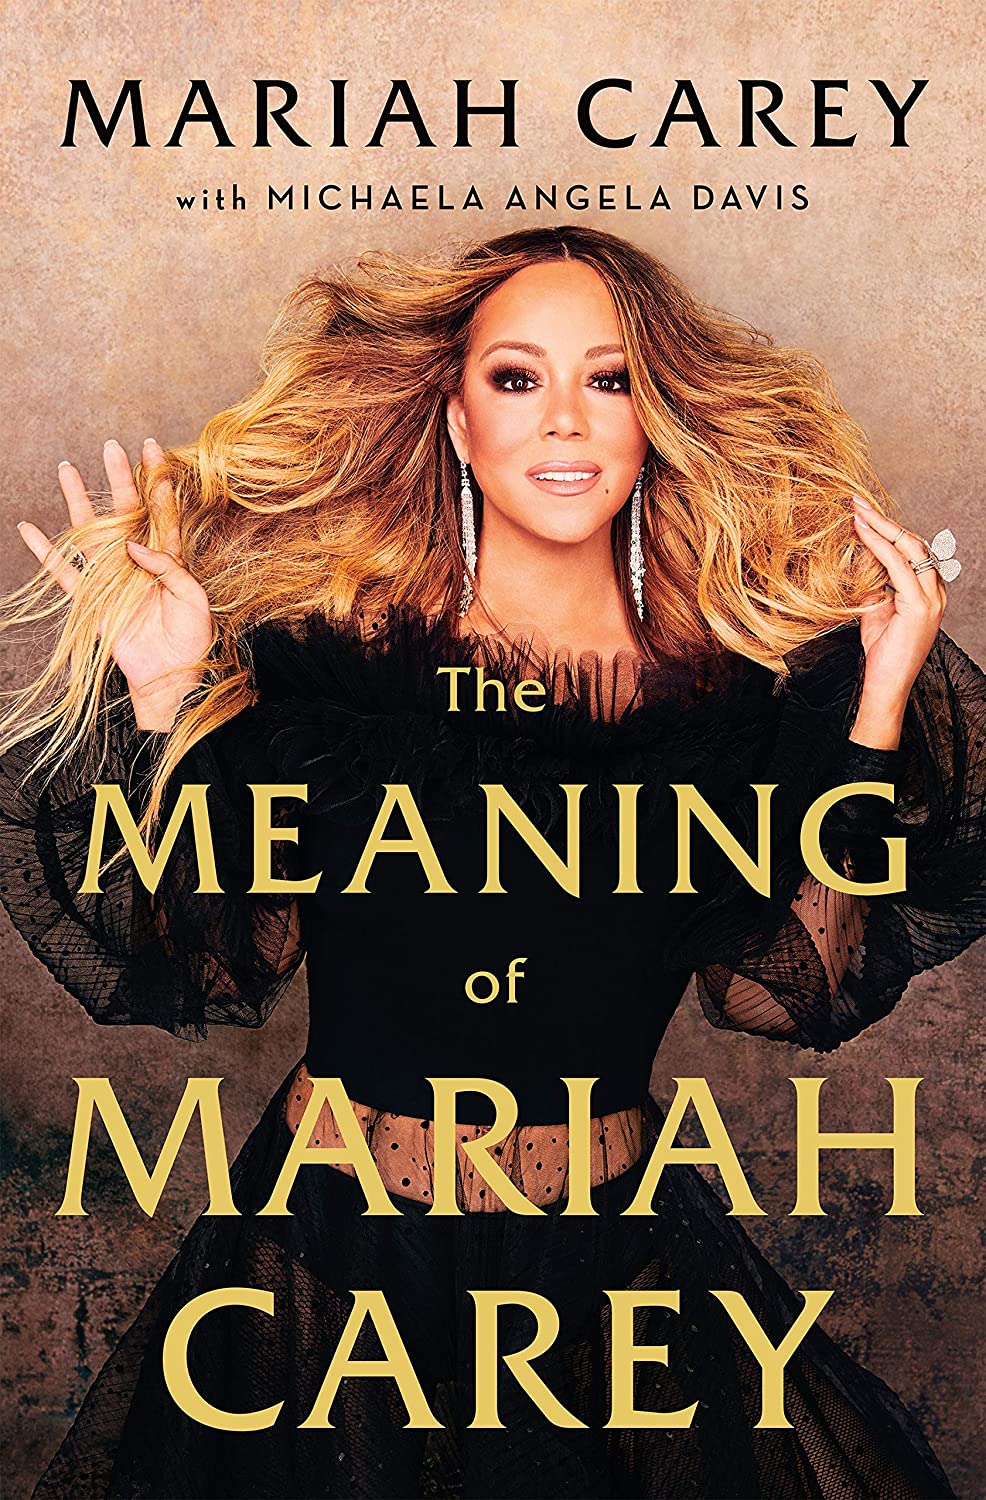 ‘The Meaning Of Mariah Carey’ And 9 Music Memoirs That Get Real About The Price Of Fame